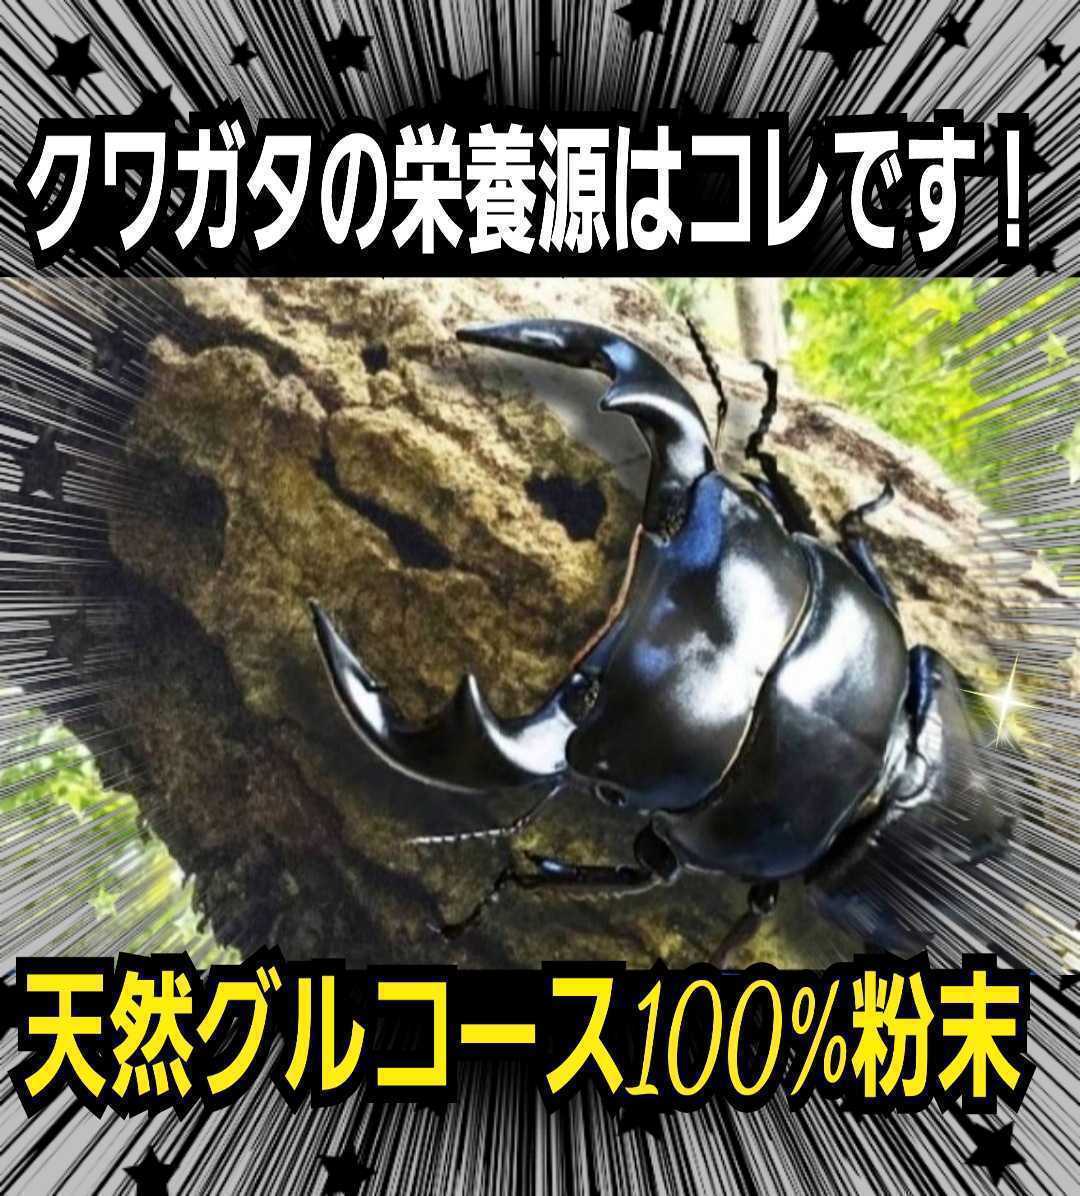  stag beetle * rhinoceros beetle. nutrition source is kore!gru course powder mat .. thread, jelly .... only! size up, production egg number up, length . exceptionally effective!